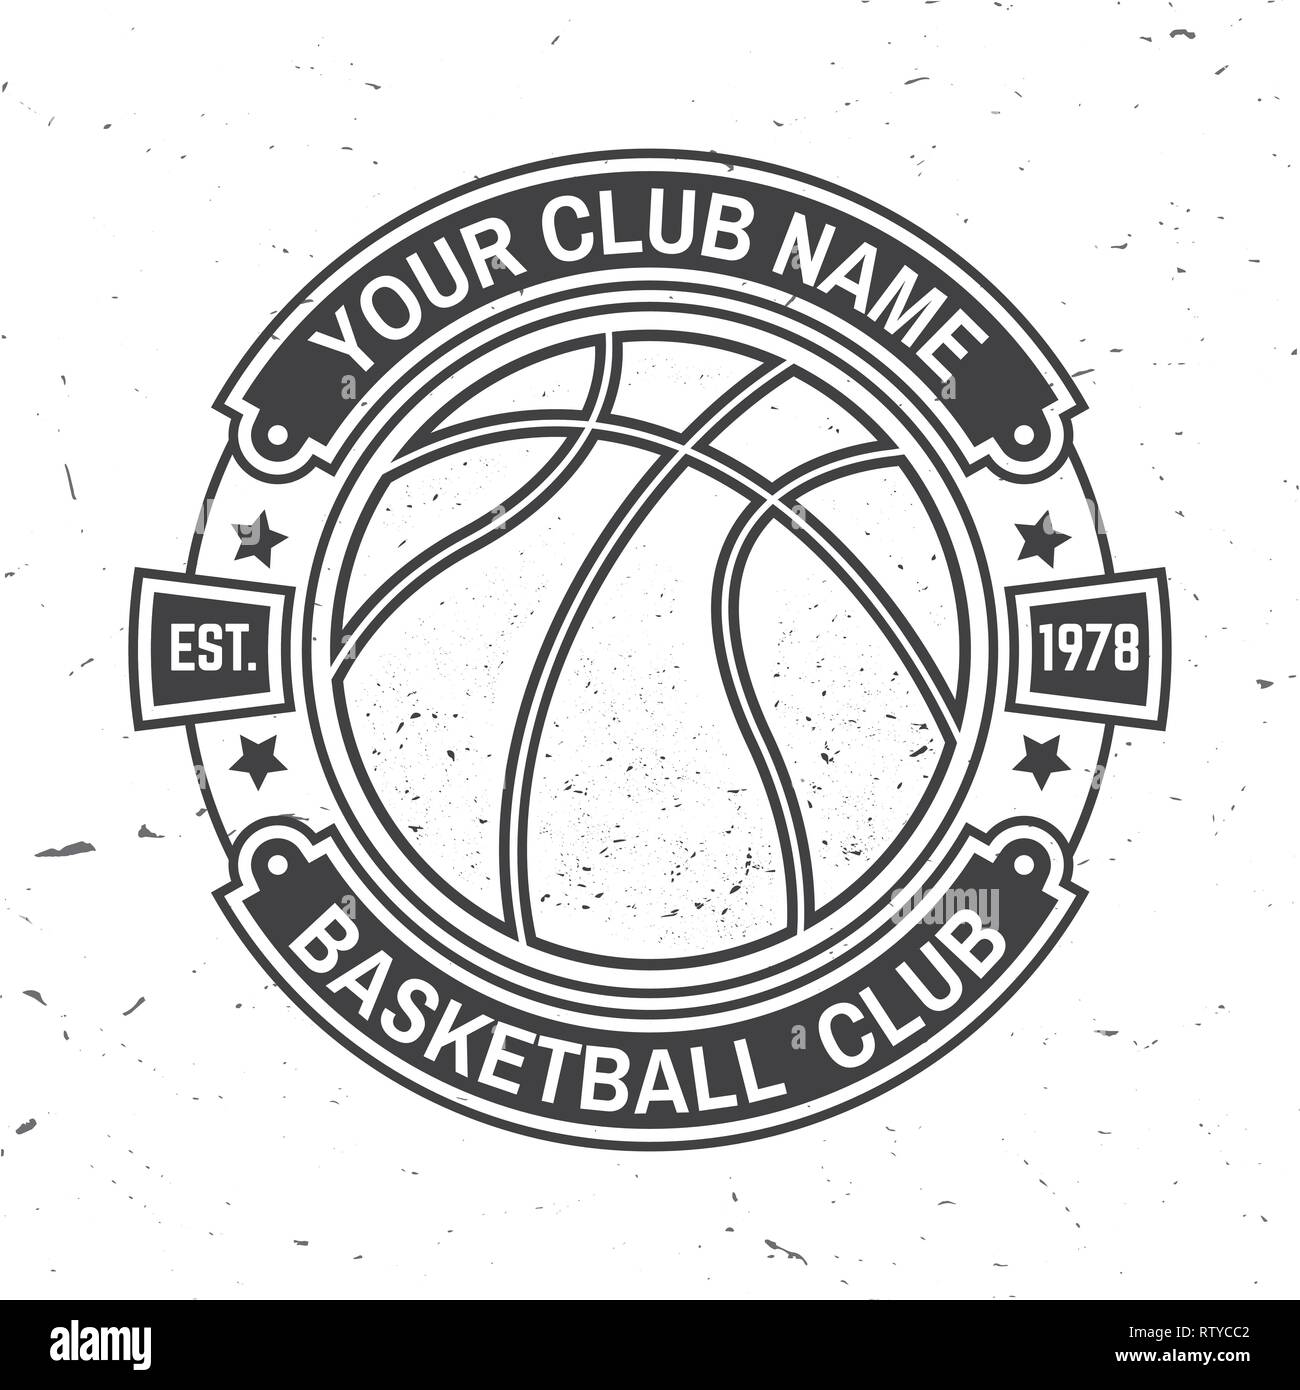 Basketball club badge. Vector illustration. Concept for shirt, print, stamp or tee. Vintage typography design with basketball ball silhouette. Stock Vector